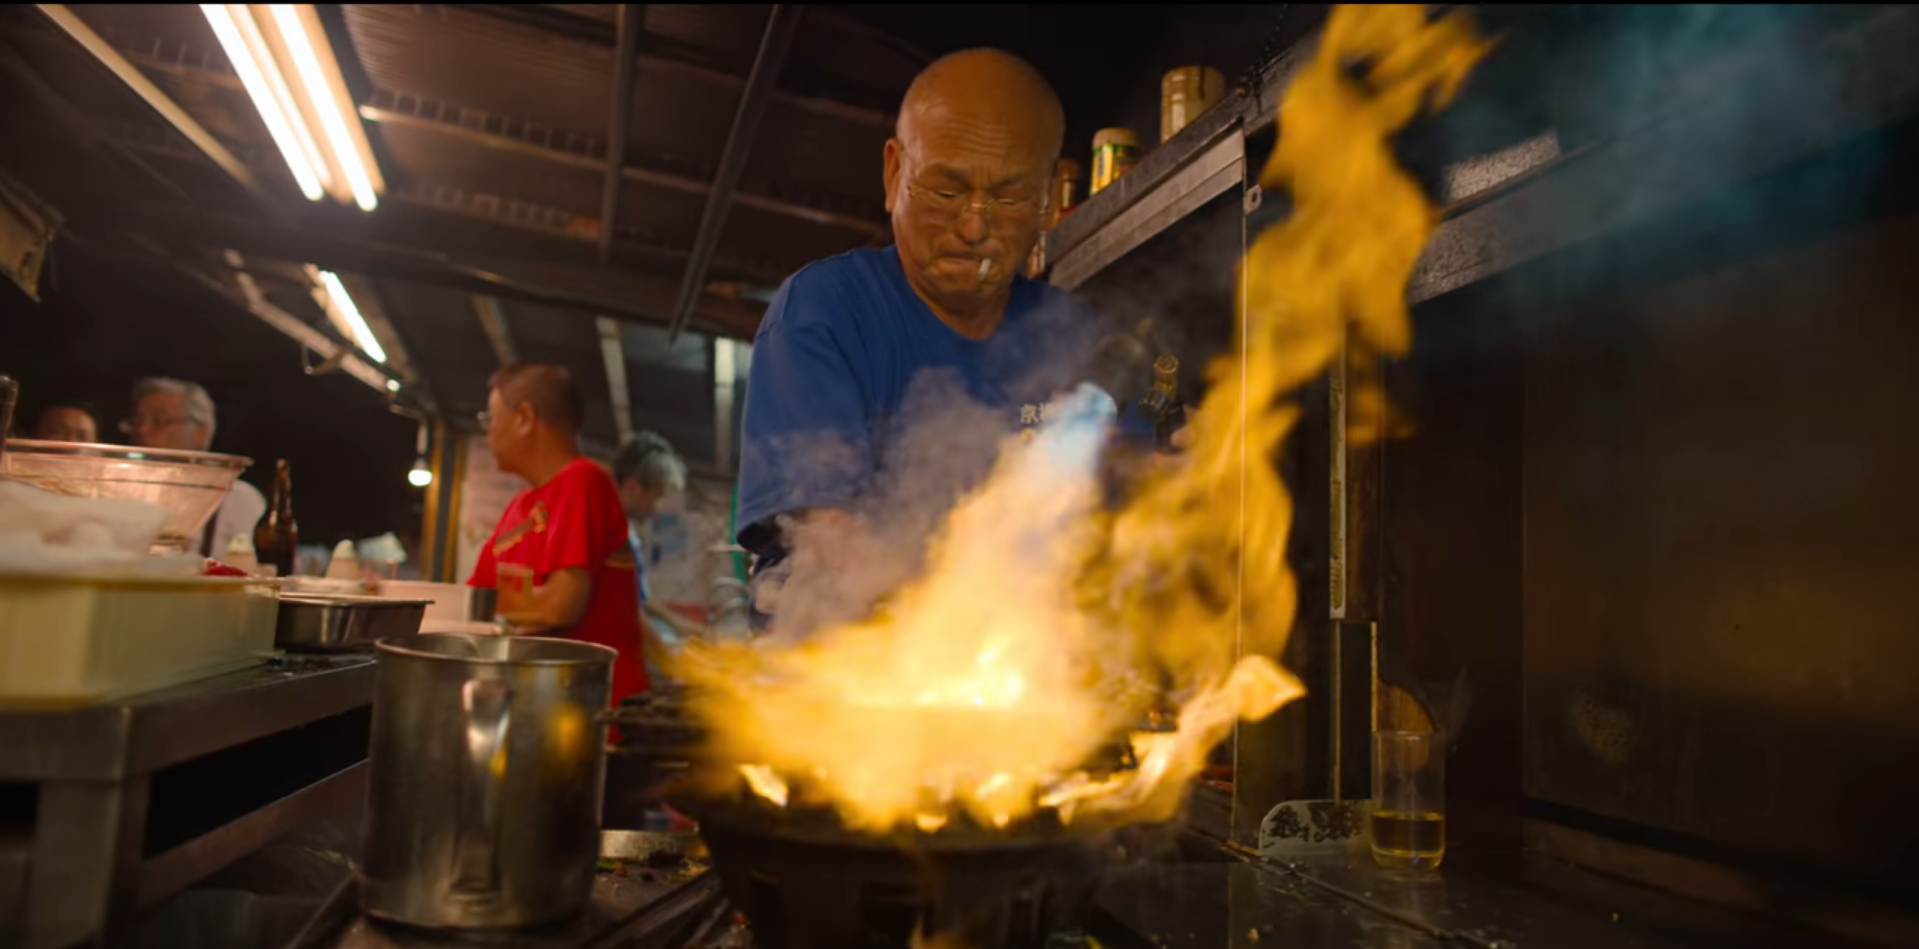 A Review Of The Street Food Documentary That’s Triggering Malaysian Foodies